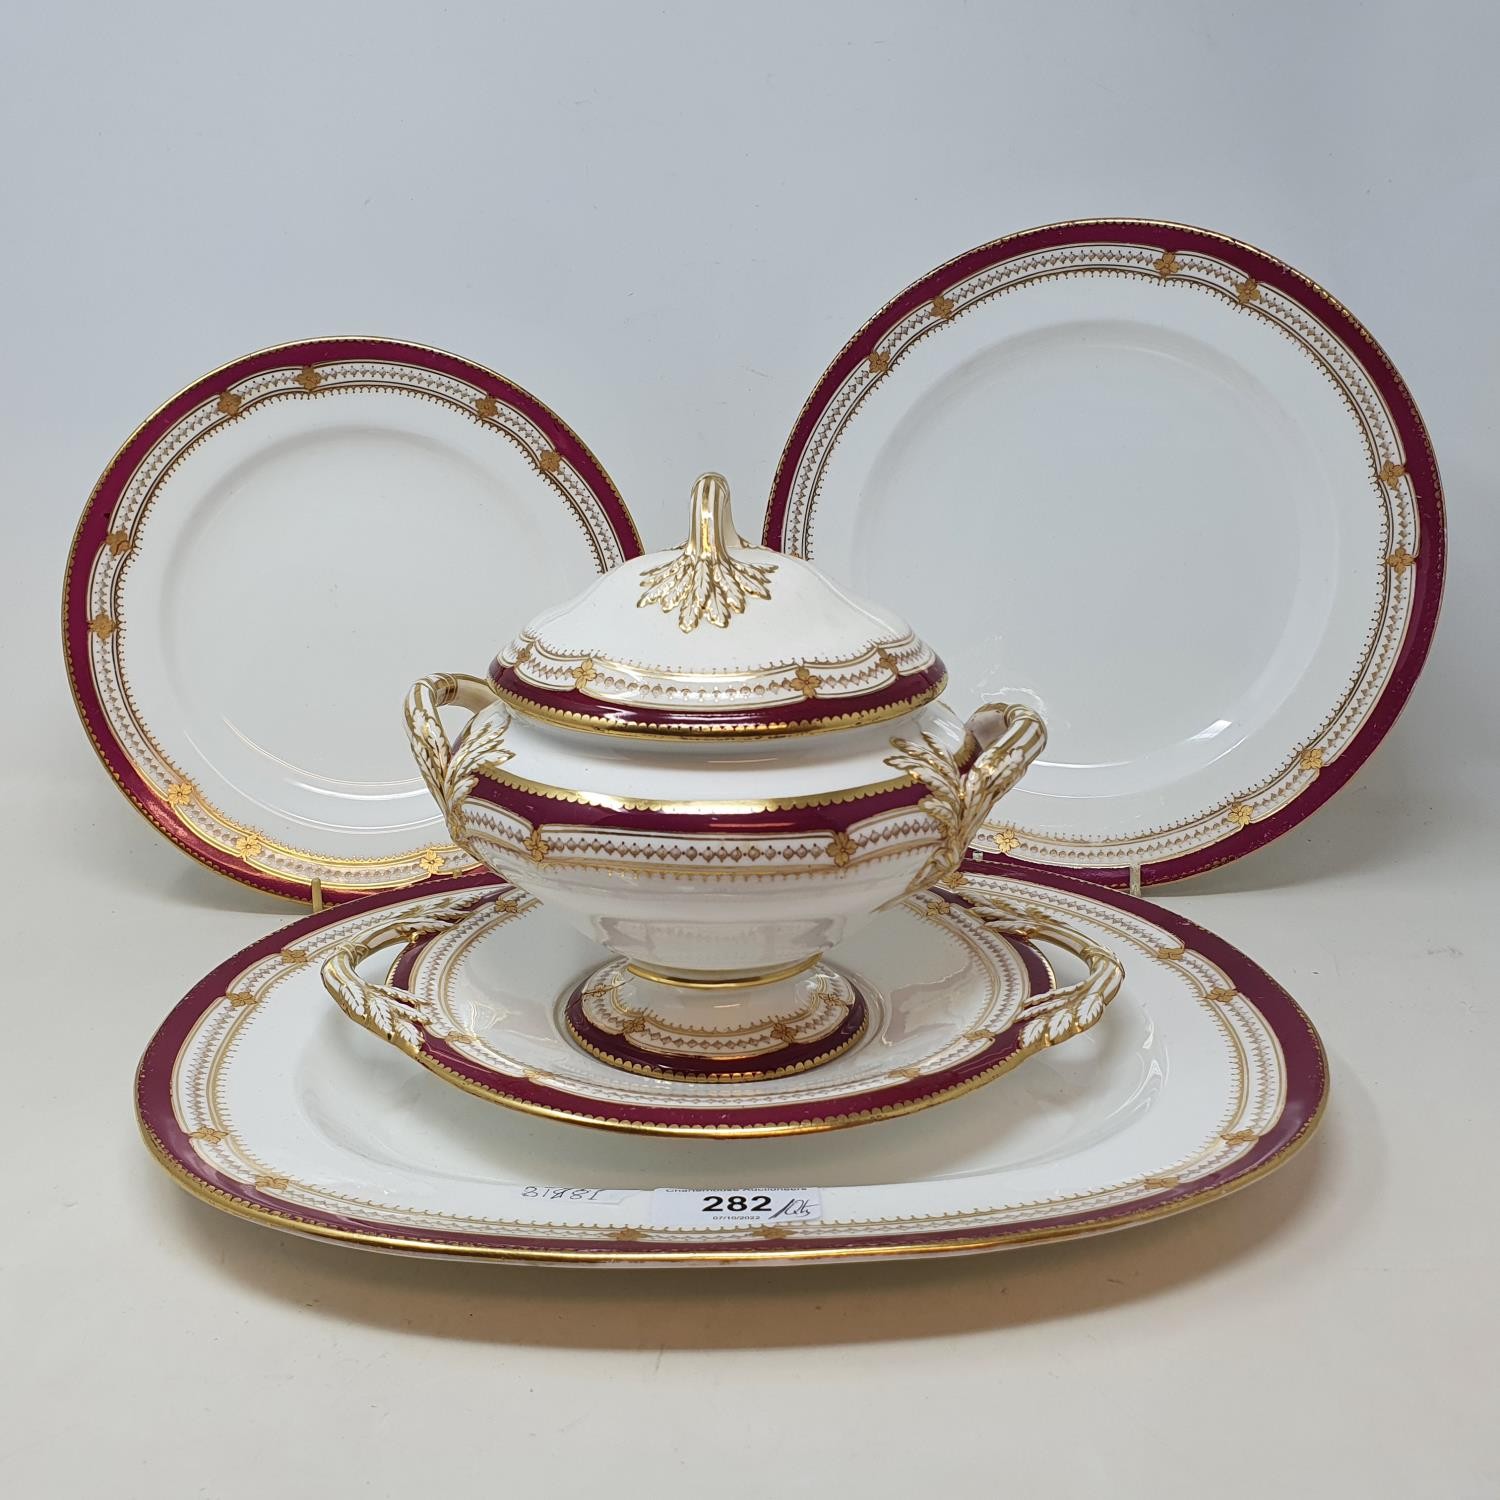 An extensive late 19th/early 20th century dinner service, decorated with a dark pink border, - Image 2 of 5